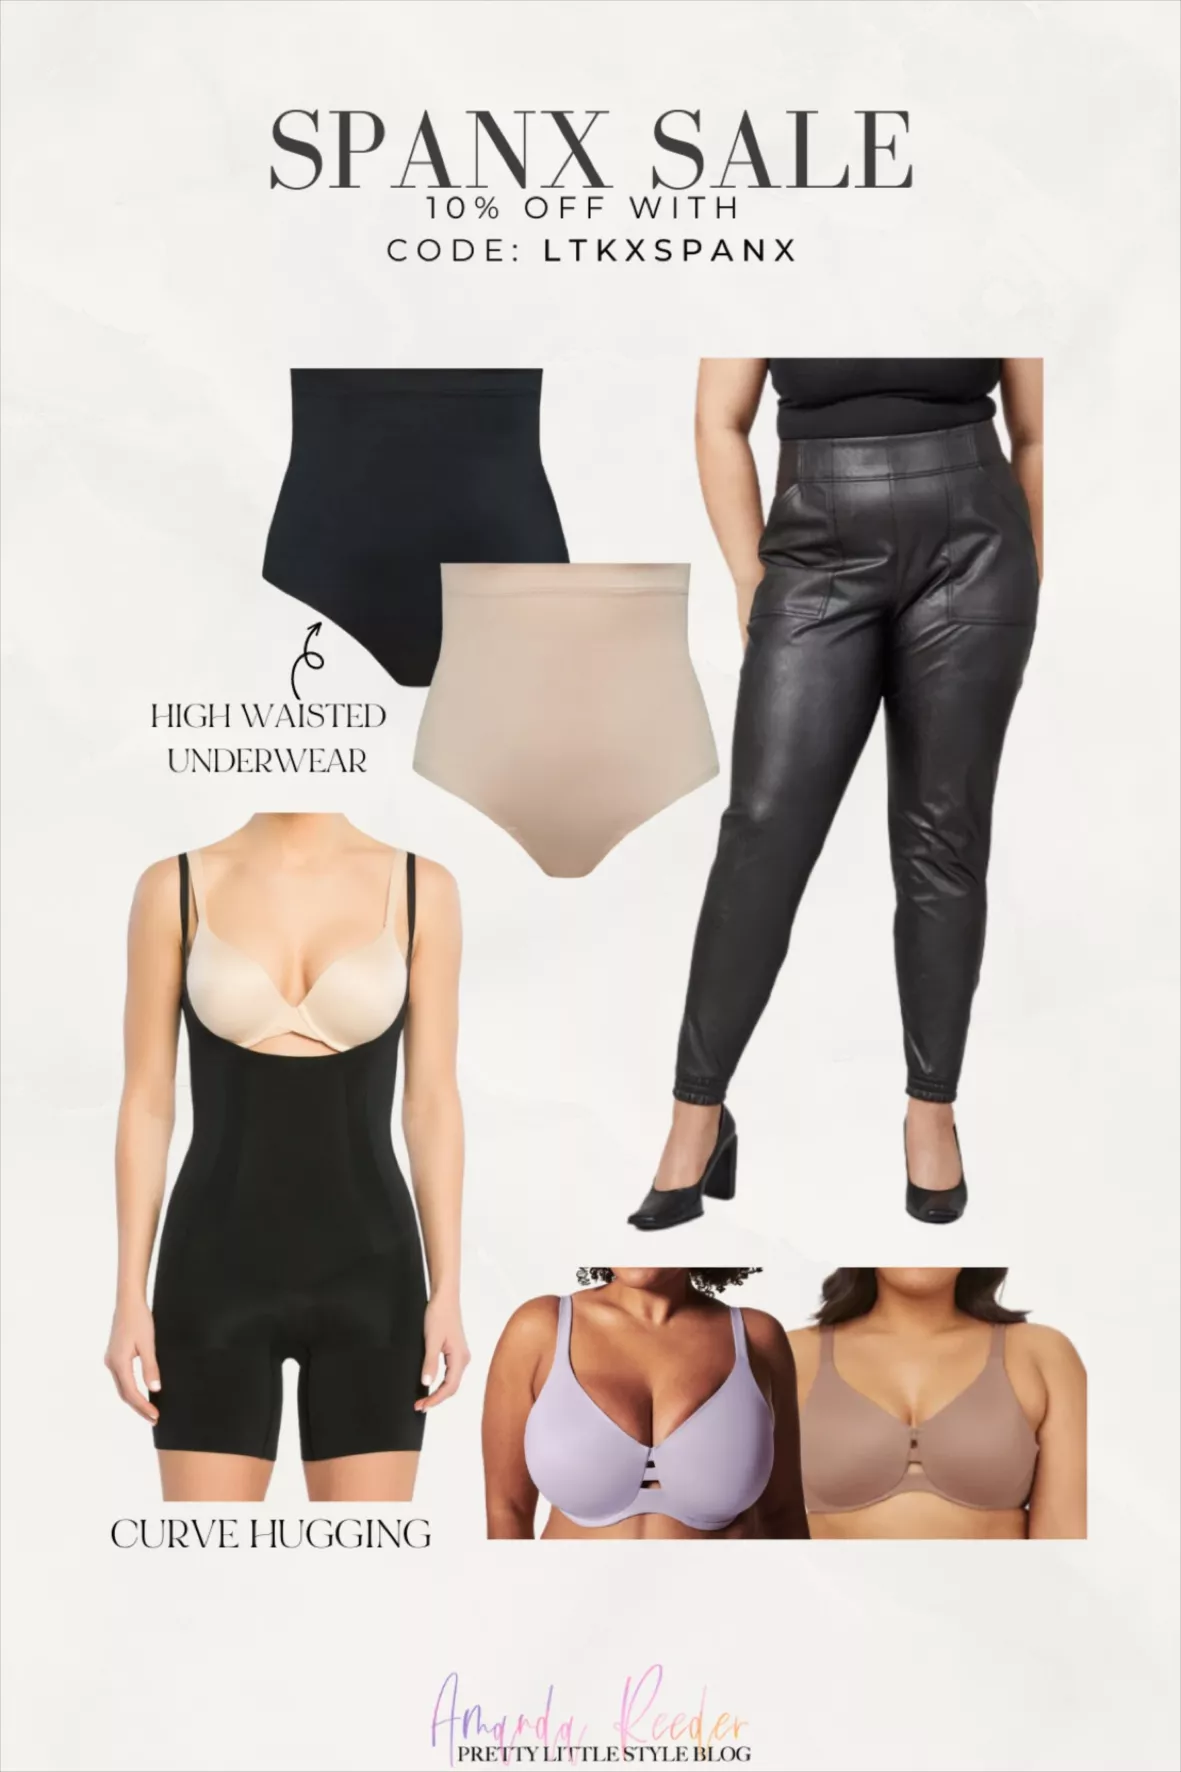 Spanx Suit Your Fancy High Waisted Brief